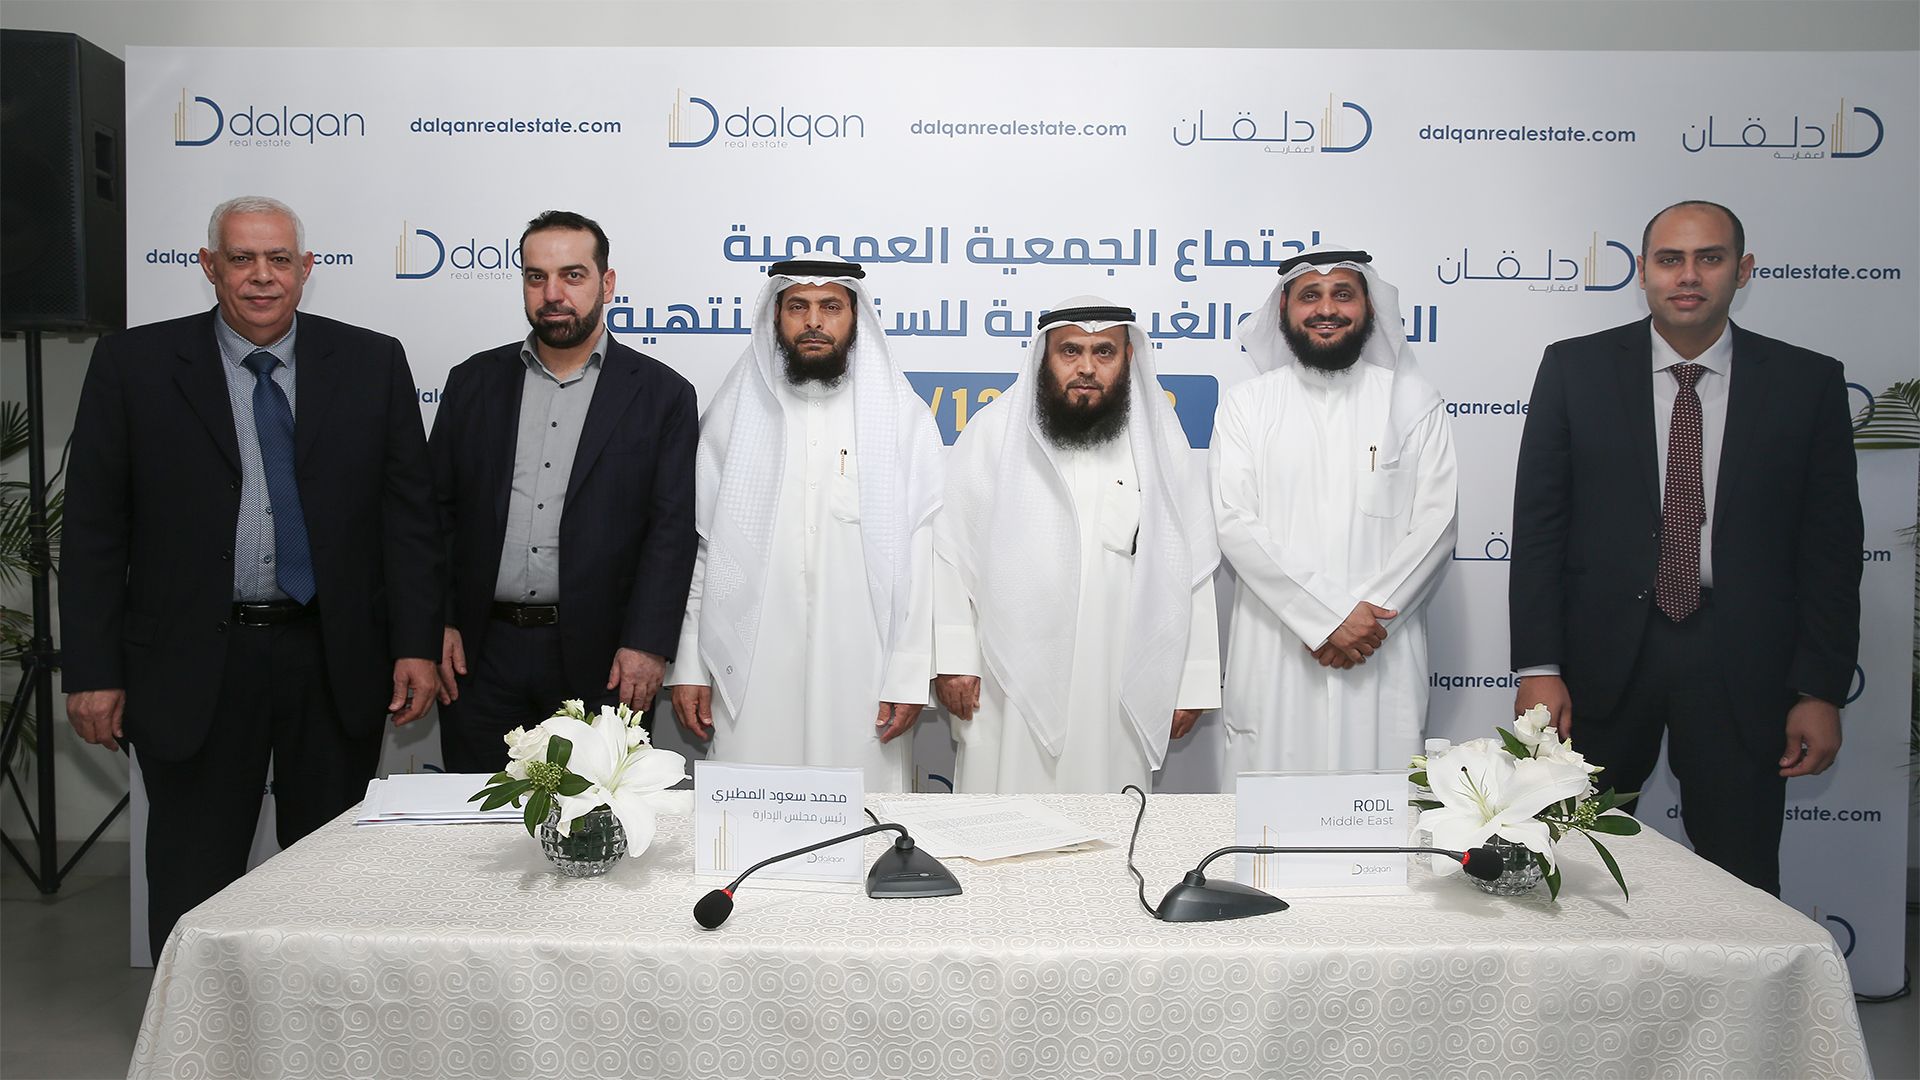 The Dalqan Real Estate Ordinary General Assembly approved the financial statements for the fiscal year ending on 12/31/2023 and approved the distribution of cash dividends of 5% of the paid-up capital